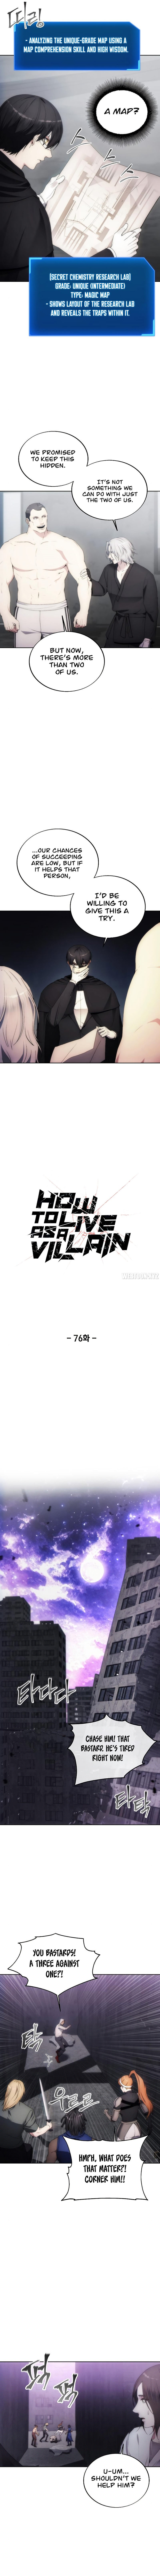 how-to-live-as-a-villain-chap-76-5